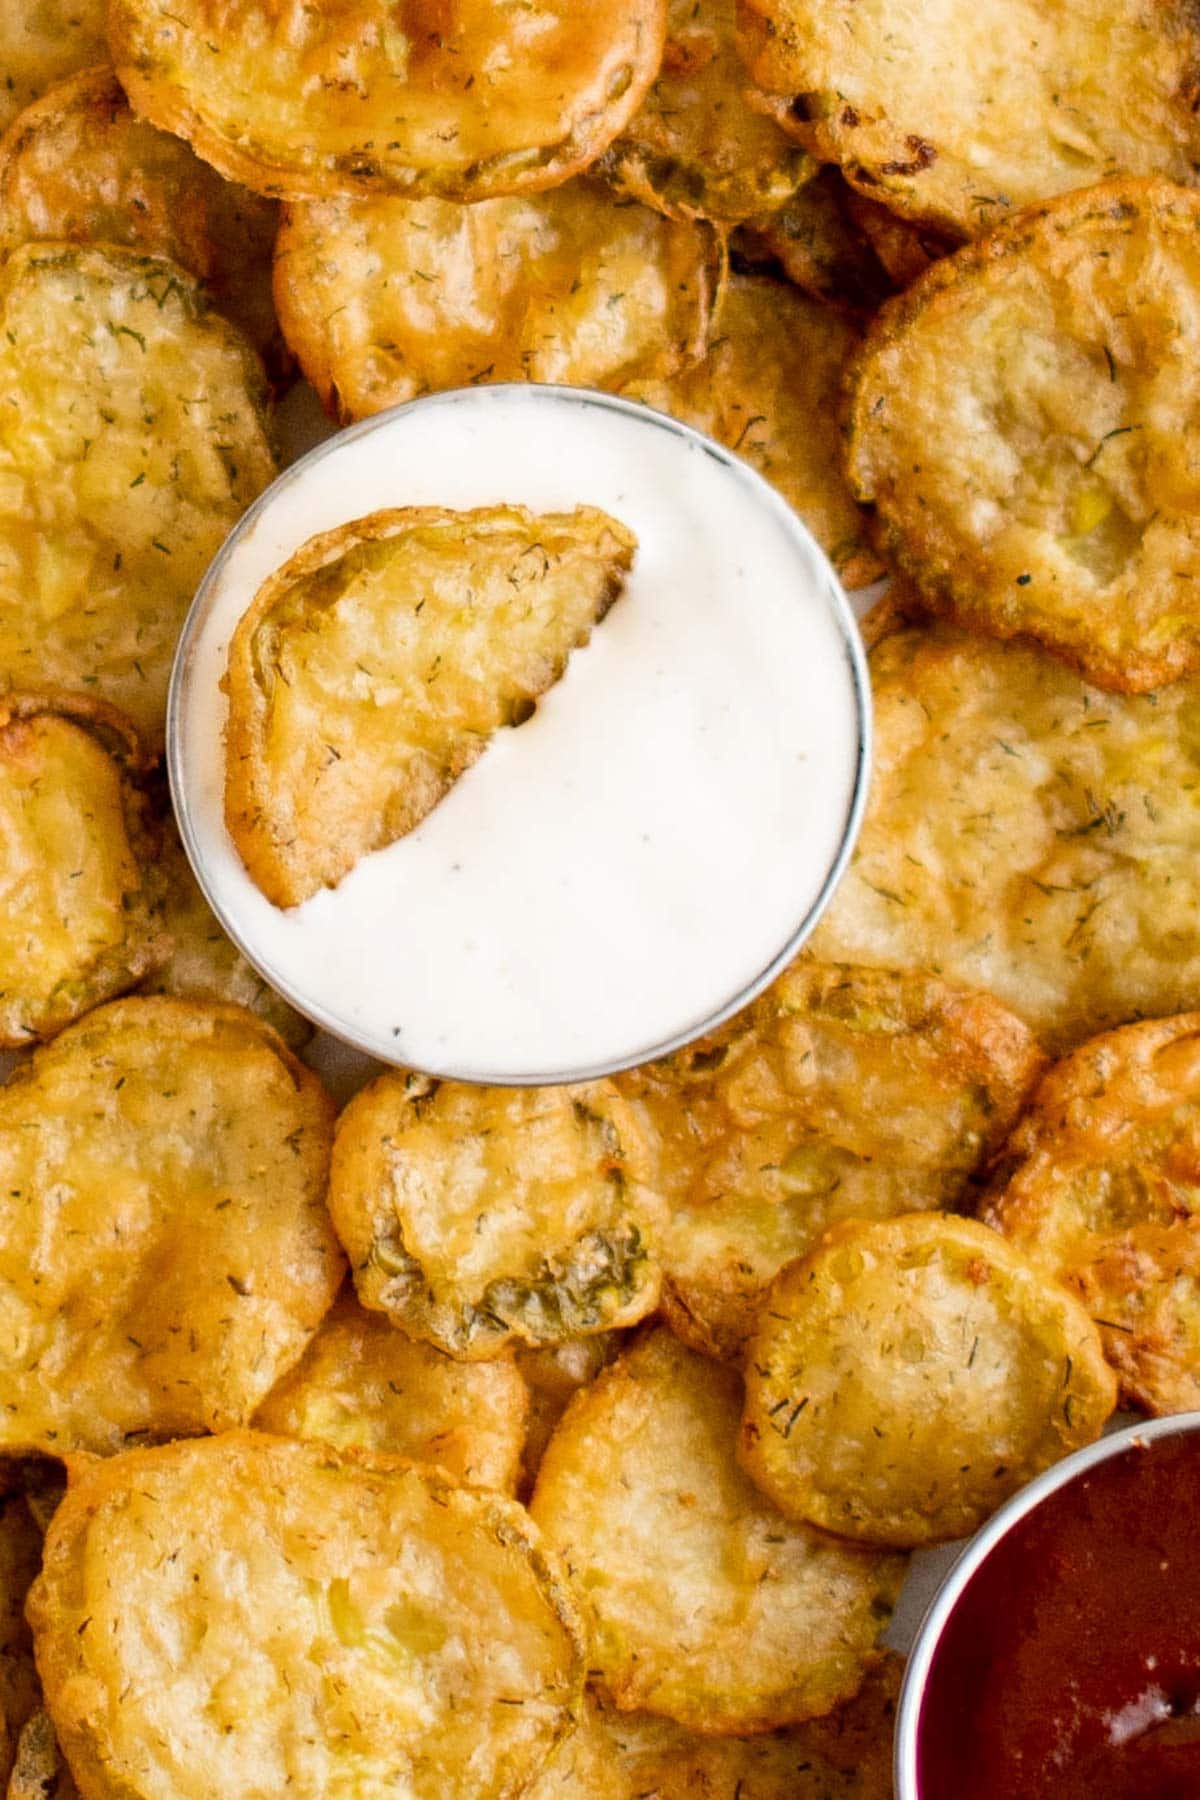 Fried pickles in a pile on a tray, with a small cup of ranch.